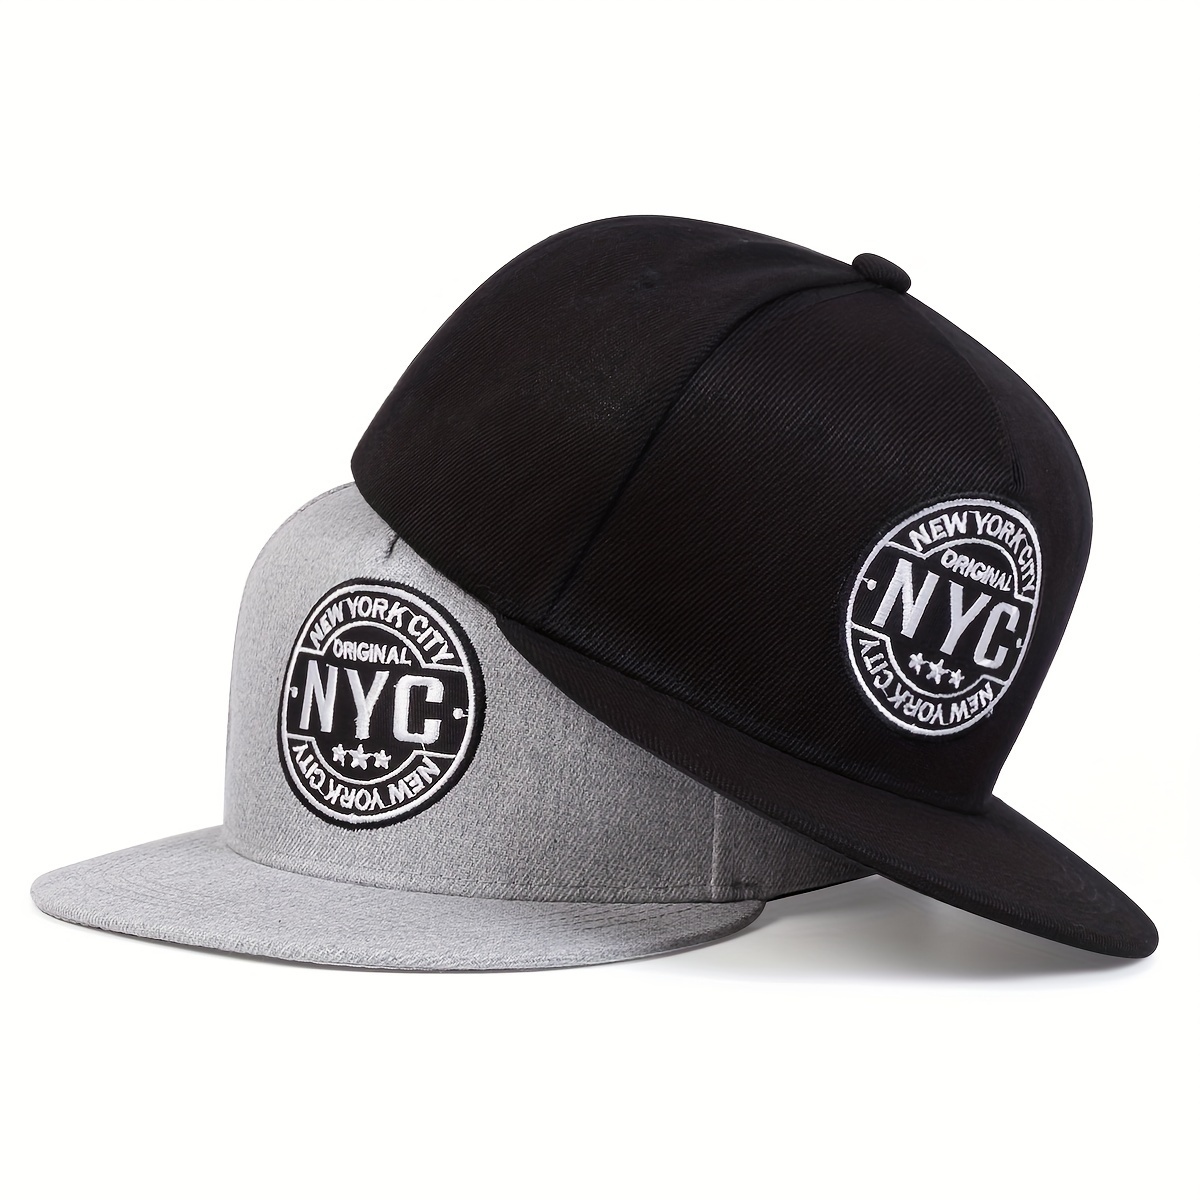 

New York Embroidery Snapback Hat Hip Hop Solid Color Baseball Cap Casual Adjustable Sports Hat For Women Men